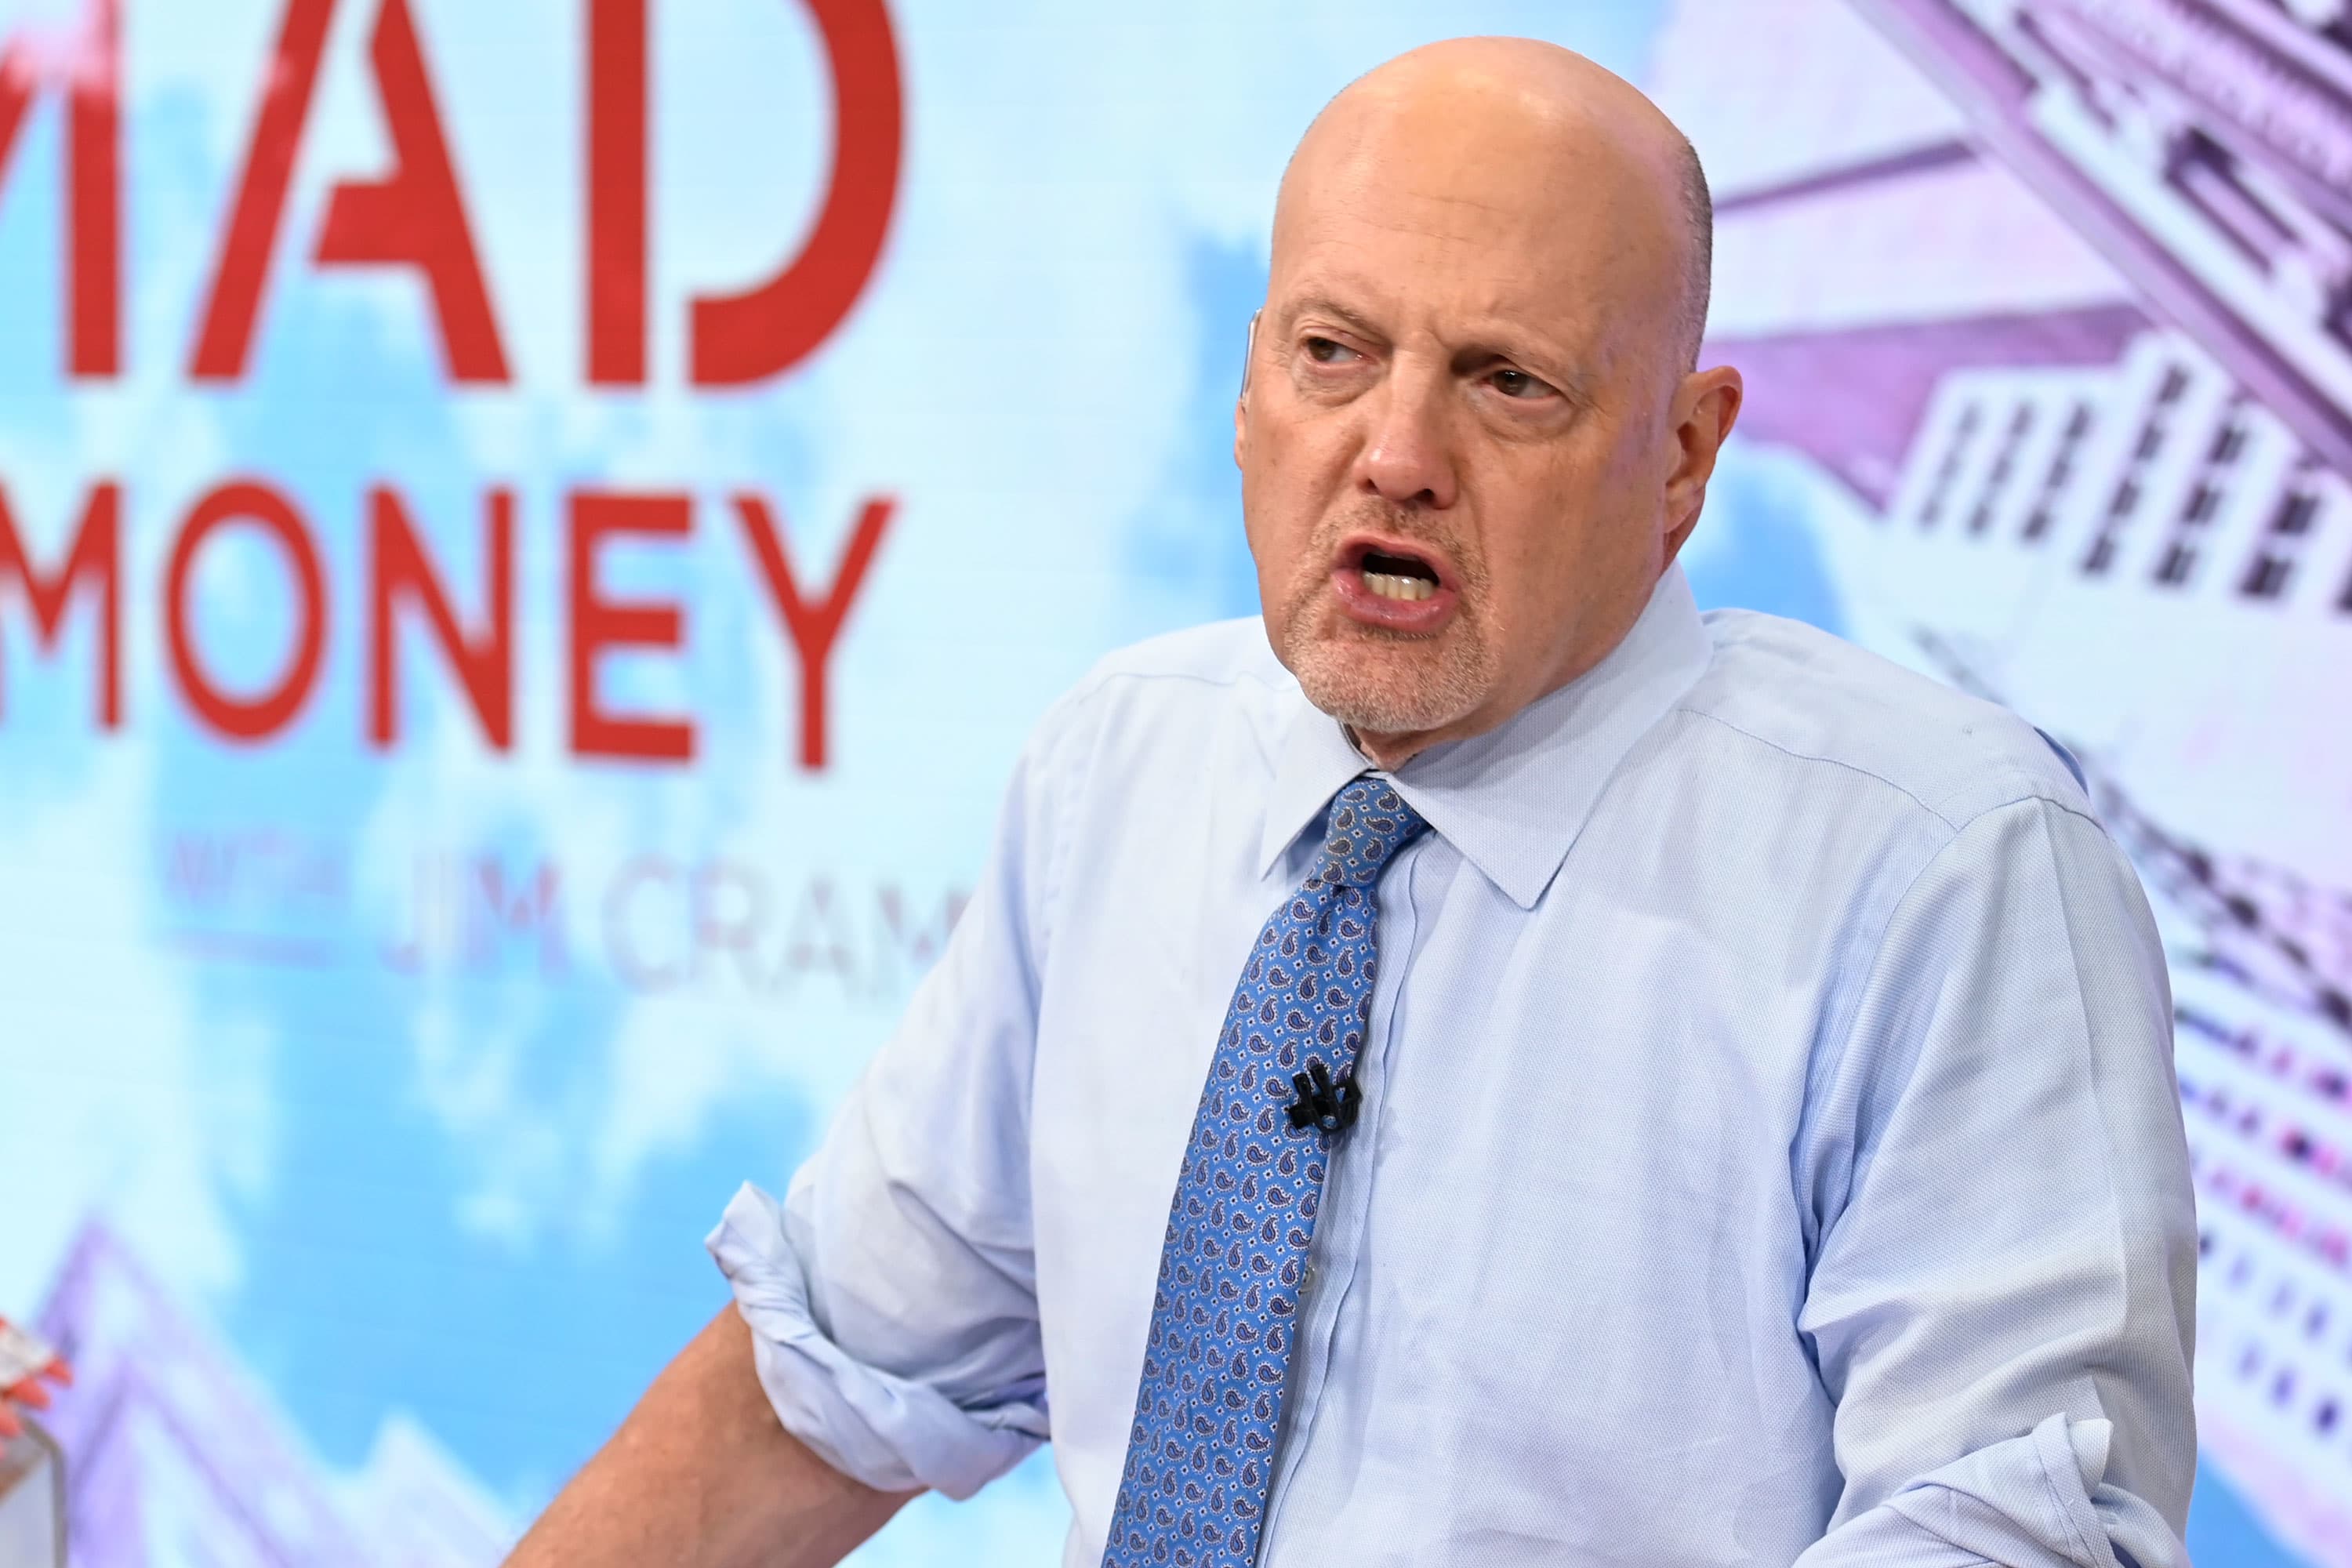 Club meeting recap: Cramer outlines the Club stocks that are well-positioned in a volatile economy 